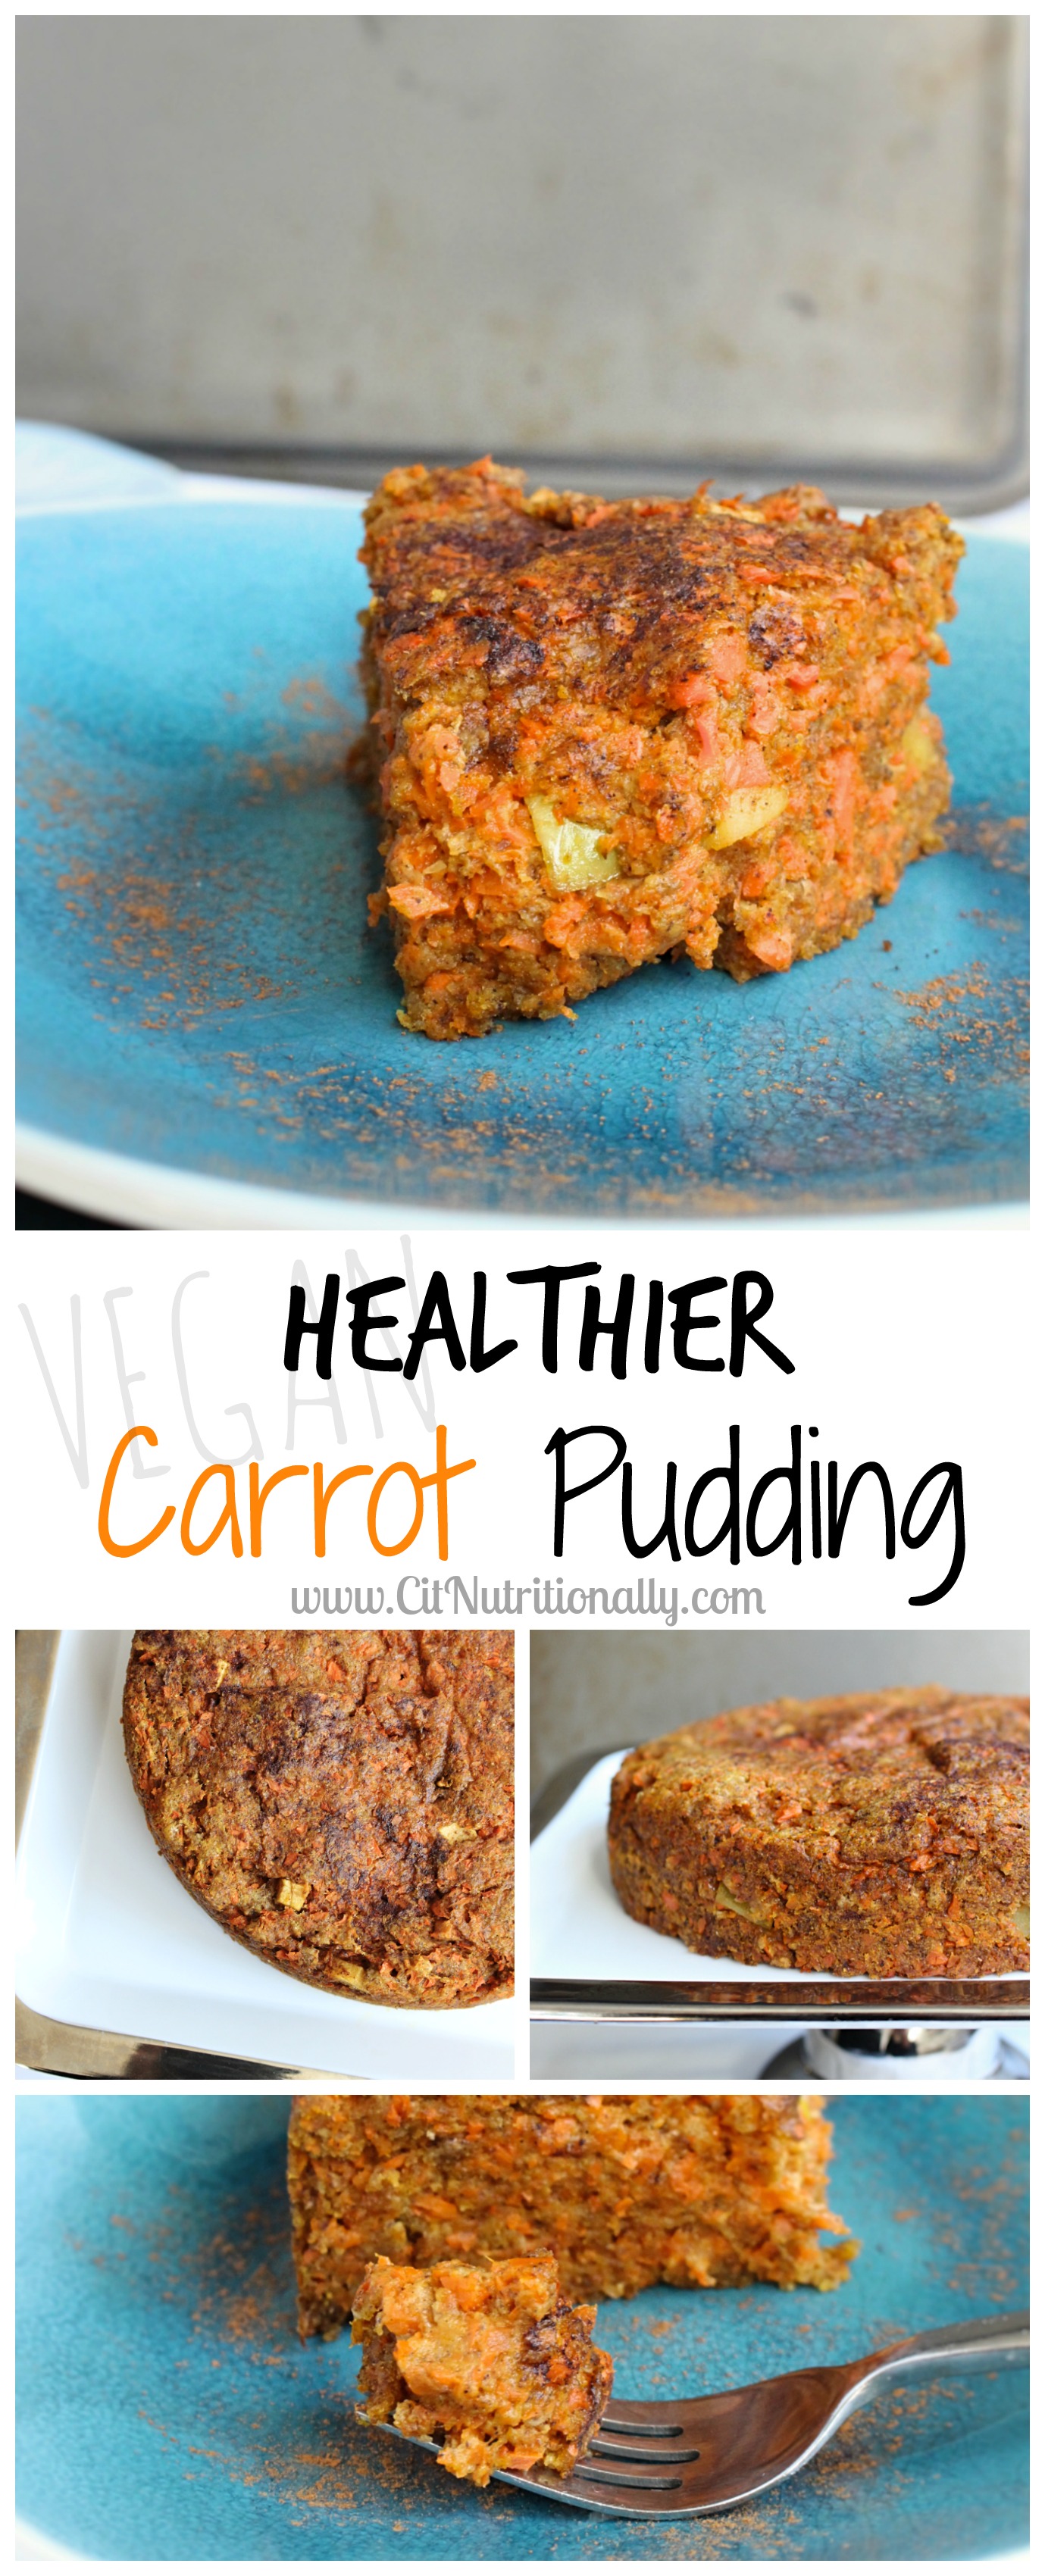 Healthier Carrot Pudding {vegan} | C it Nutritionally A great addition to your Thanksgiving table! Made with 100% whole wheat flour, sweetened with date sugar and apples, and full of delicious nutrition! 